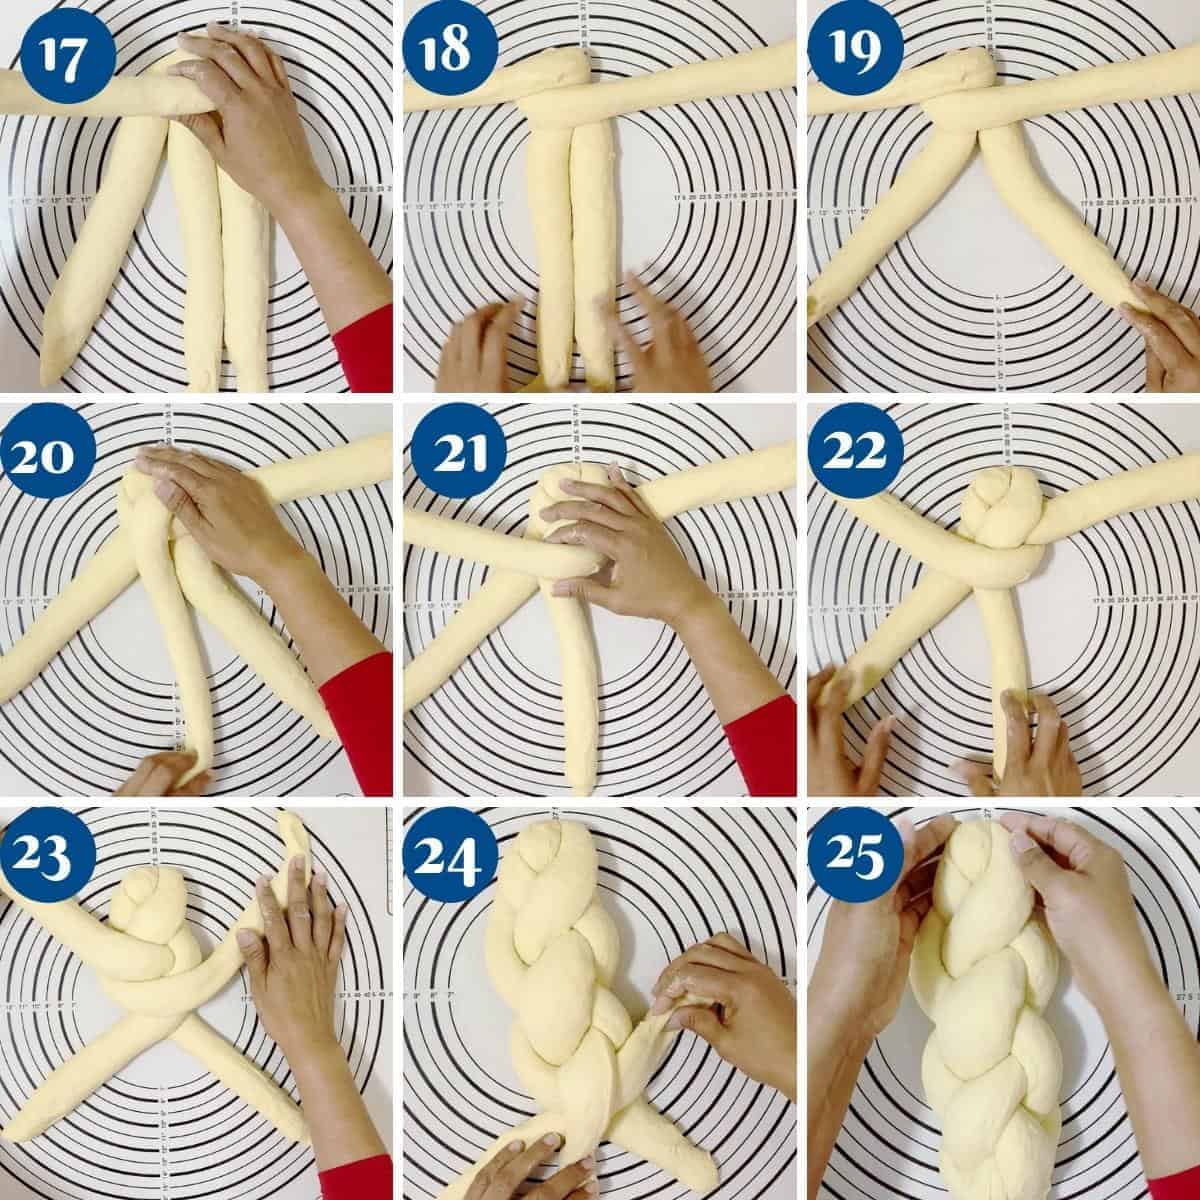 Four Braided Challah Dough Progress Pictures2